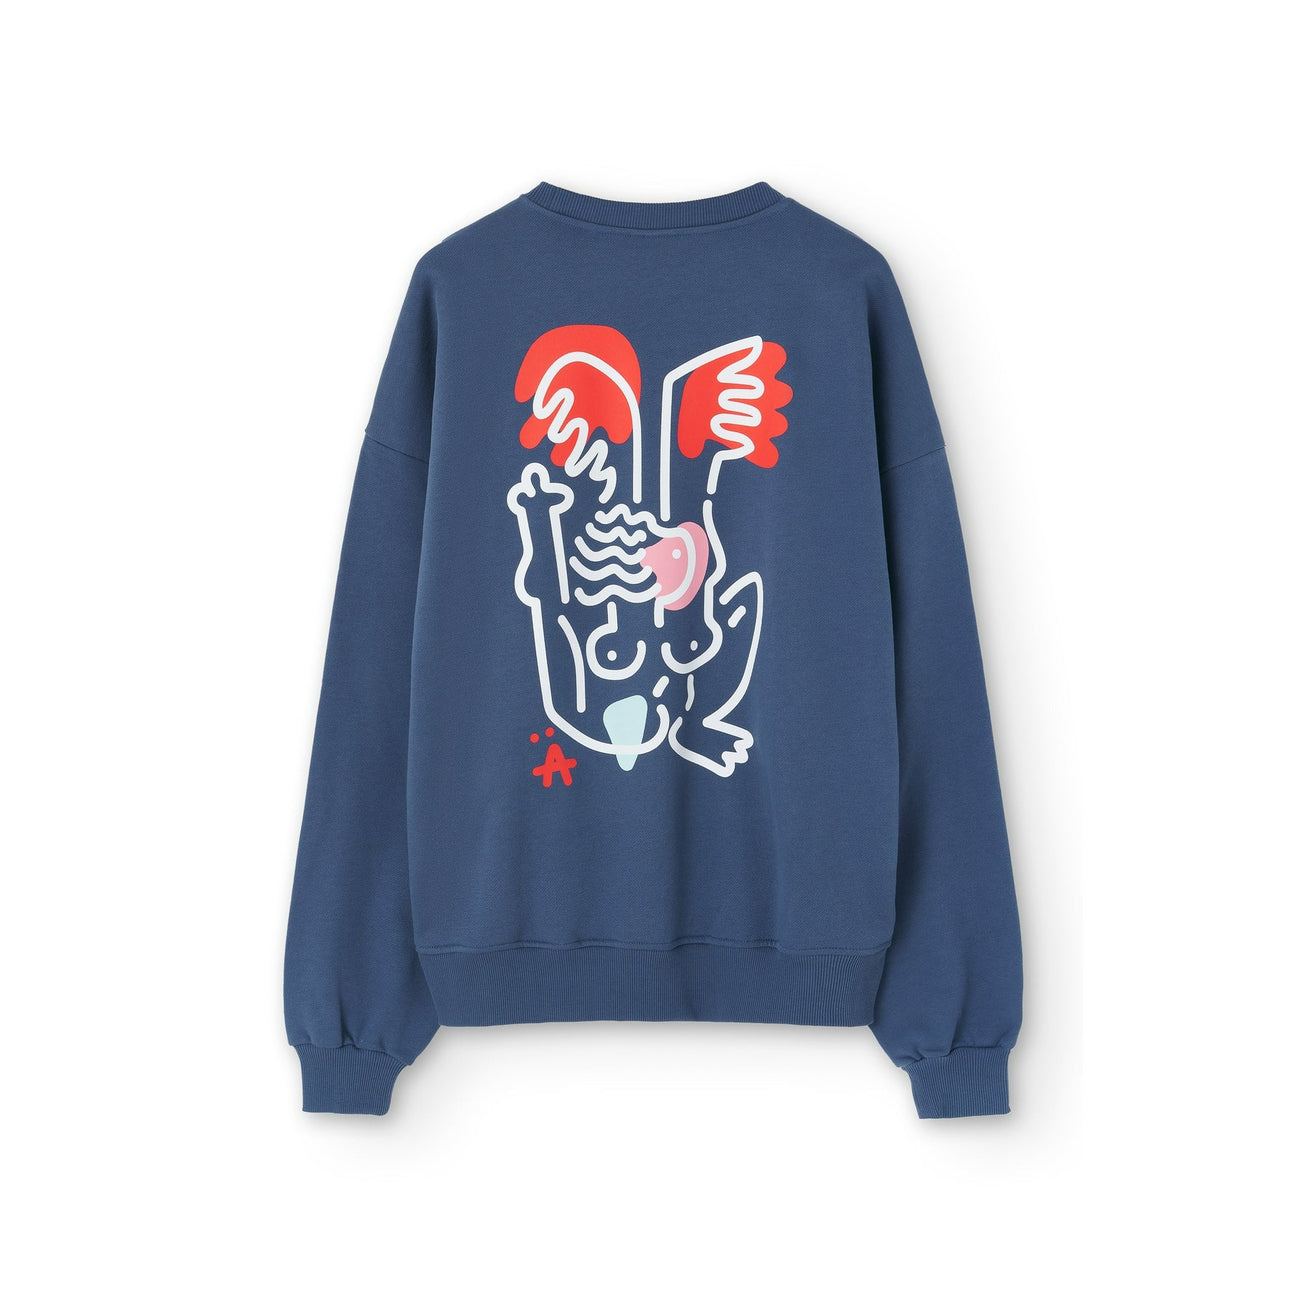 Load image into Gallery viewer, NWHR Angel Crewneck
